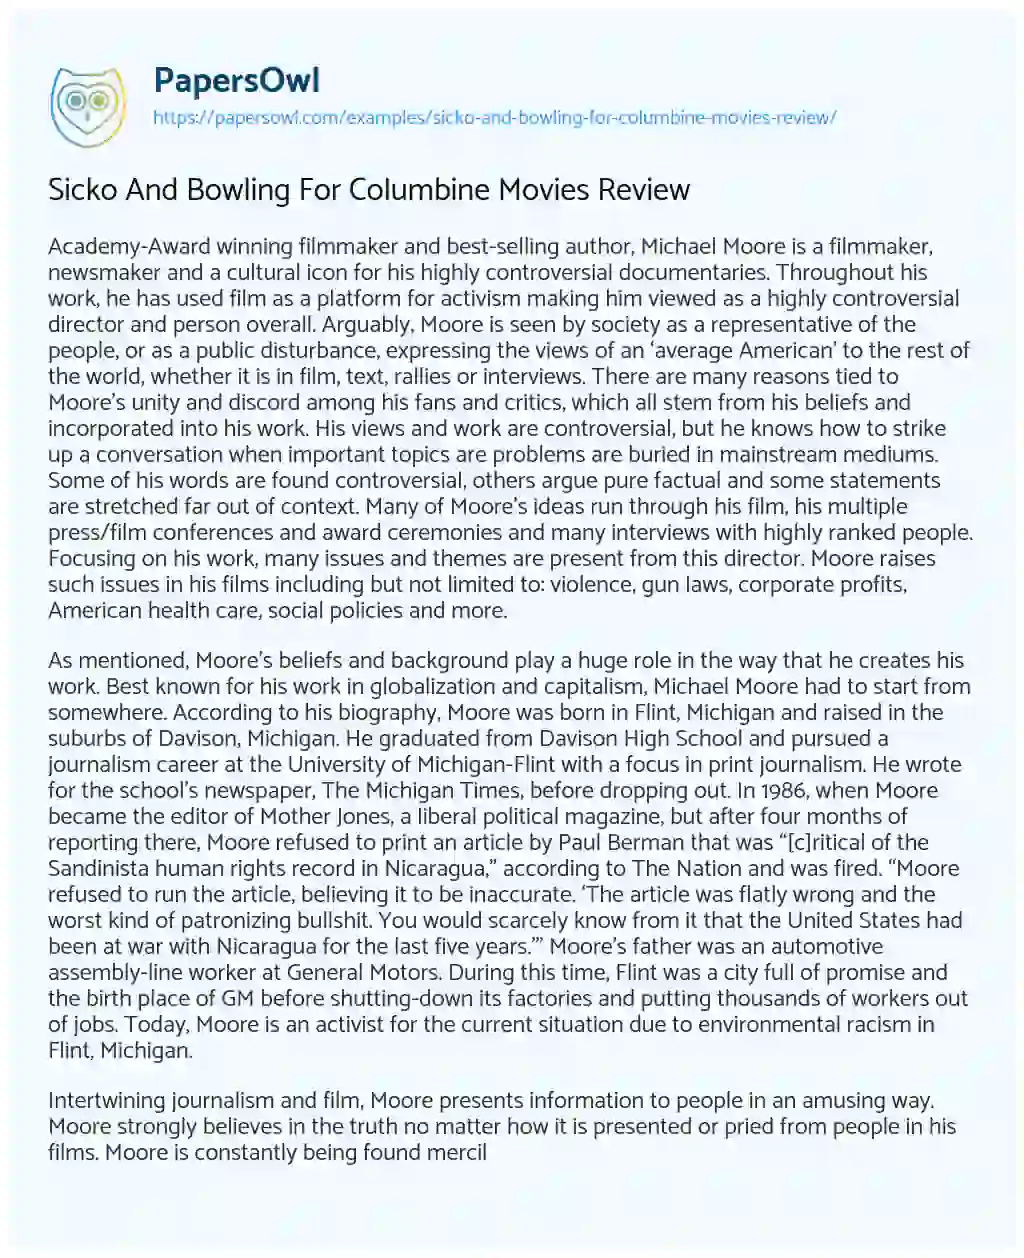 Essay on Sicko and Bowling for Columbine Movies Review